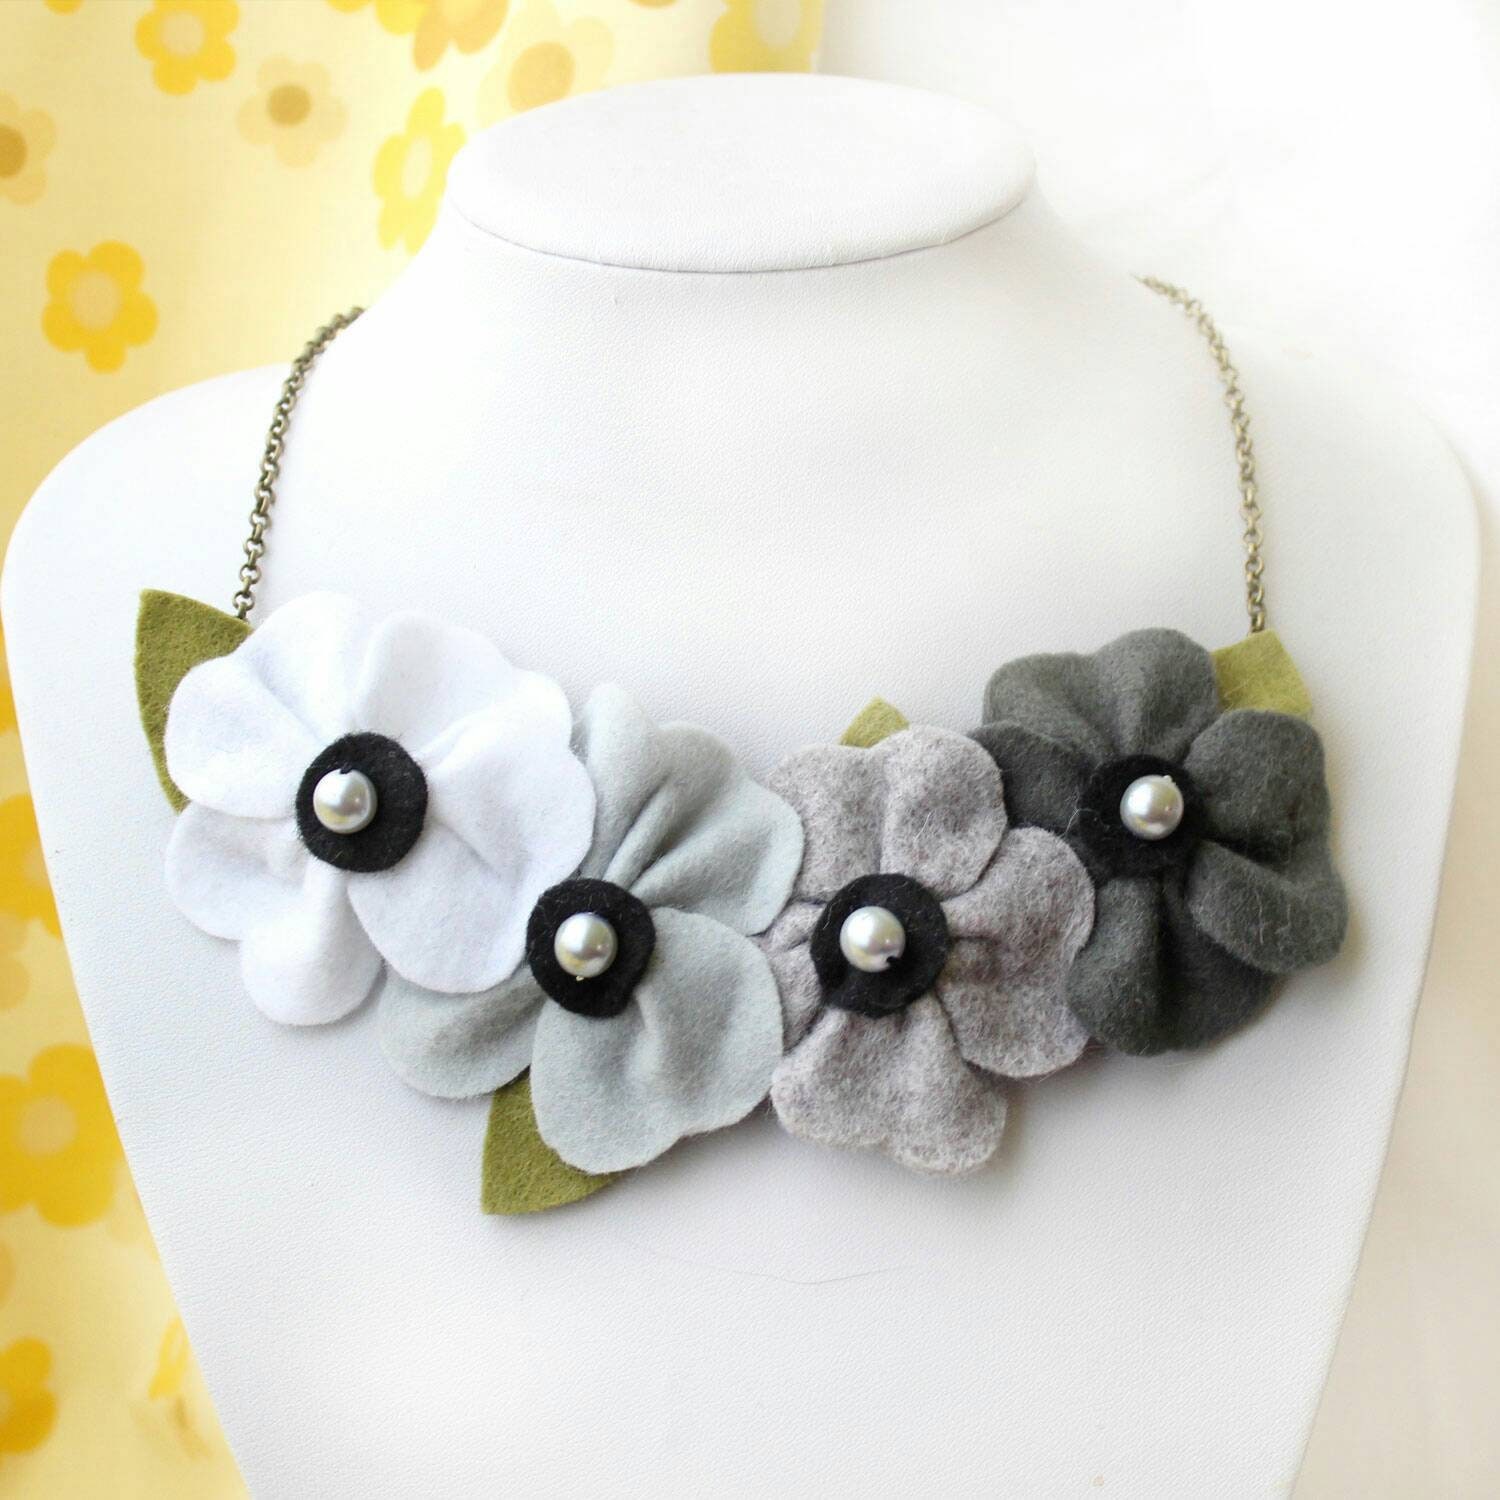 Grey & White Statement Necklace With Felt Flowers & Glass Pearls